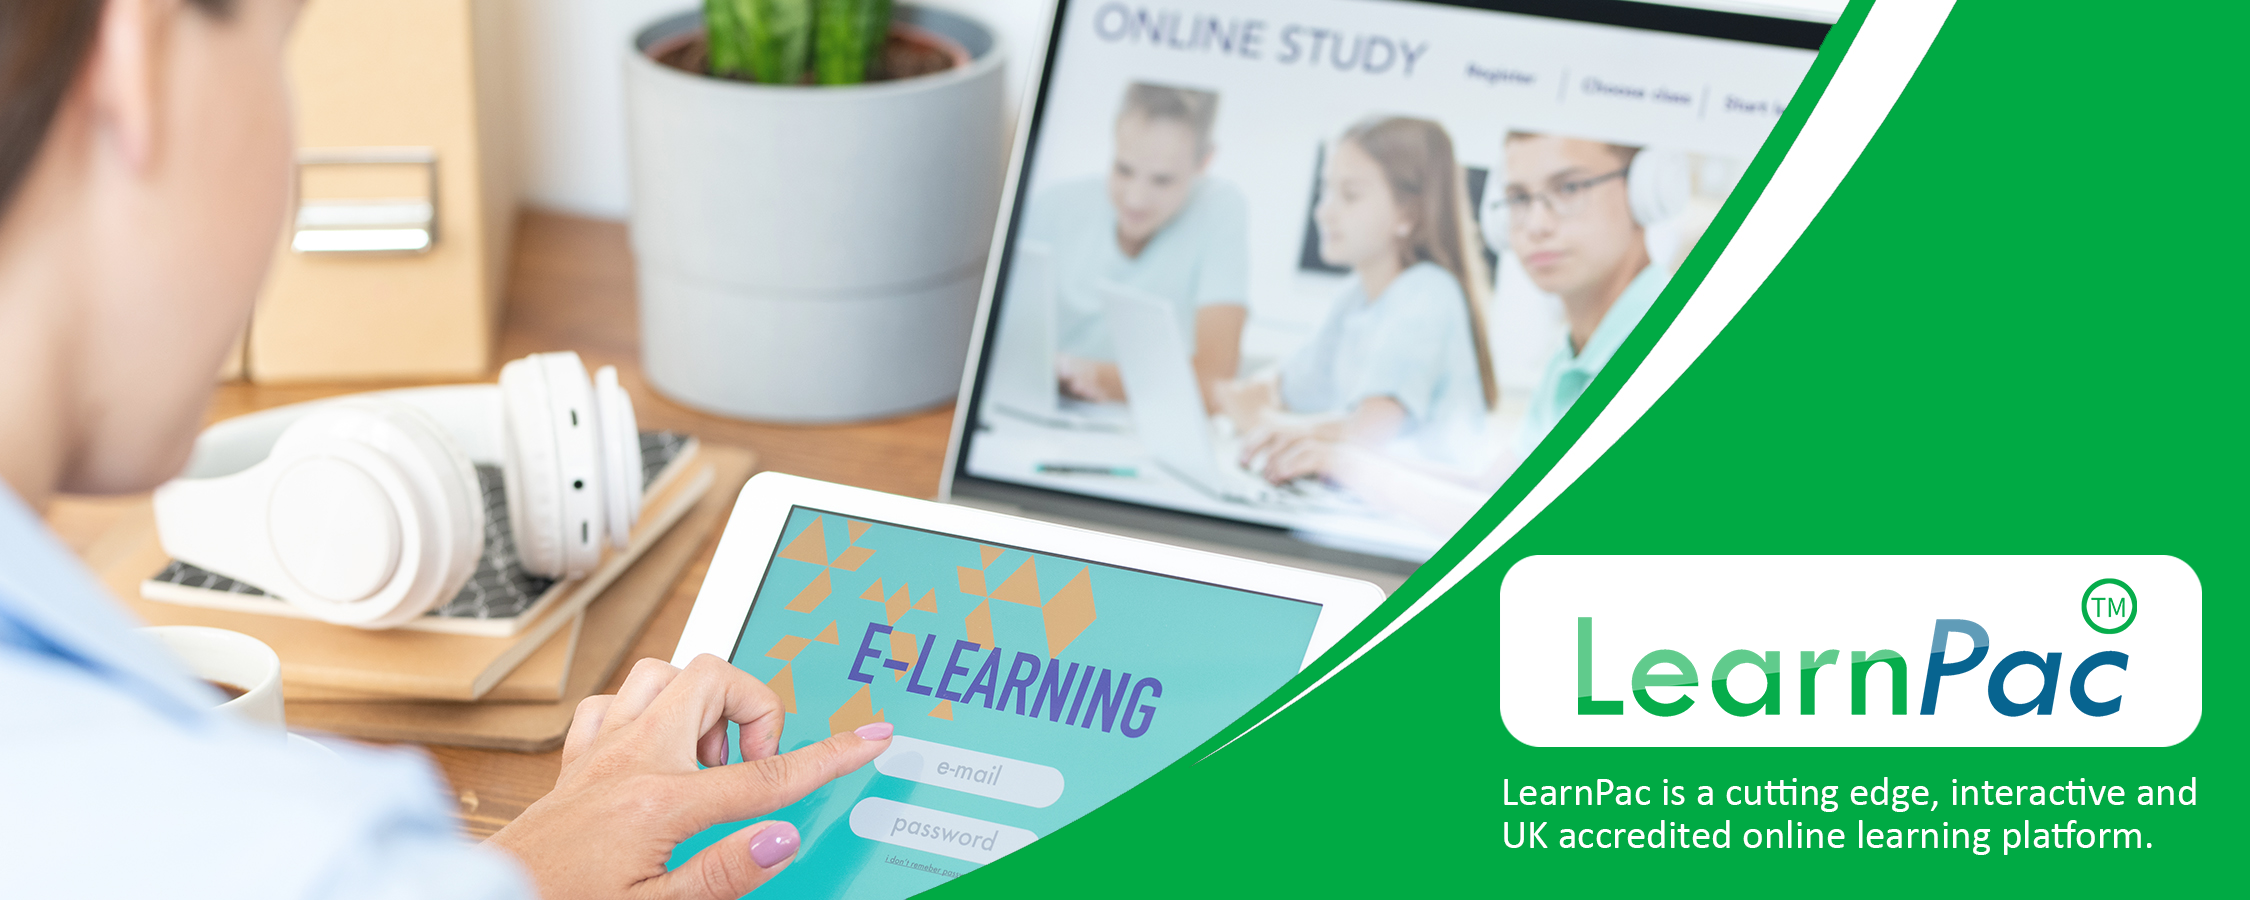 Promoting and Maintaining Own Mental Health and Well Being - Online Training Courses - LearnPac Systems UK -